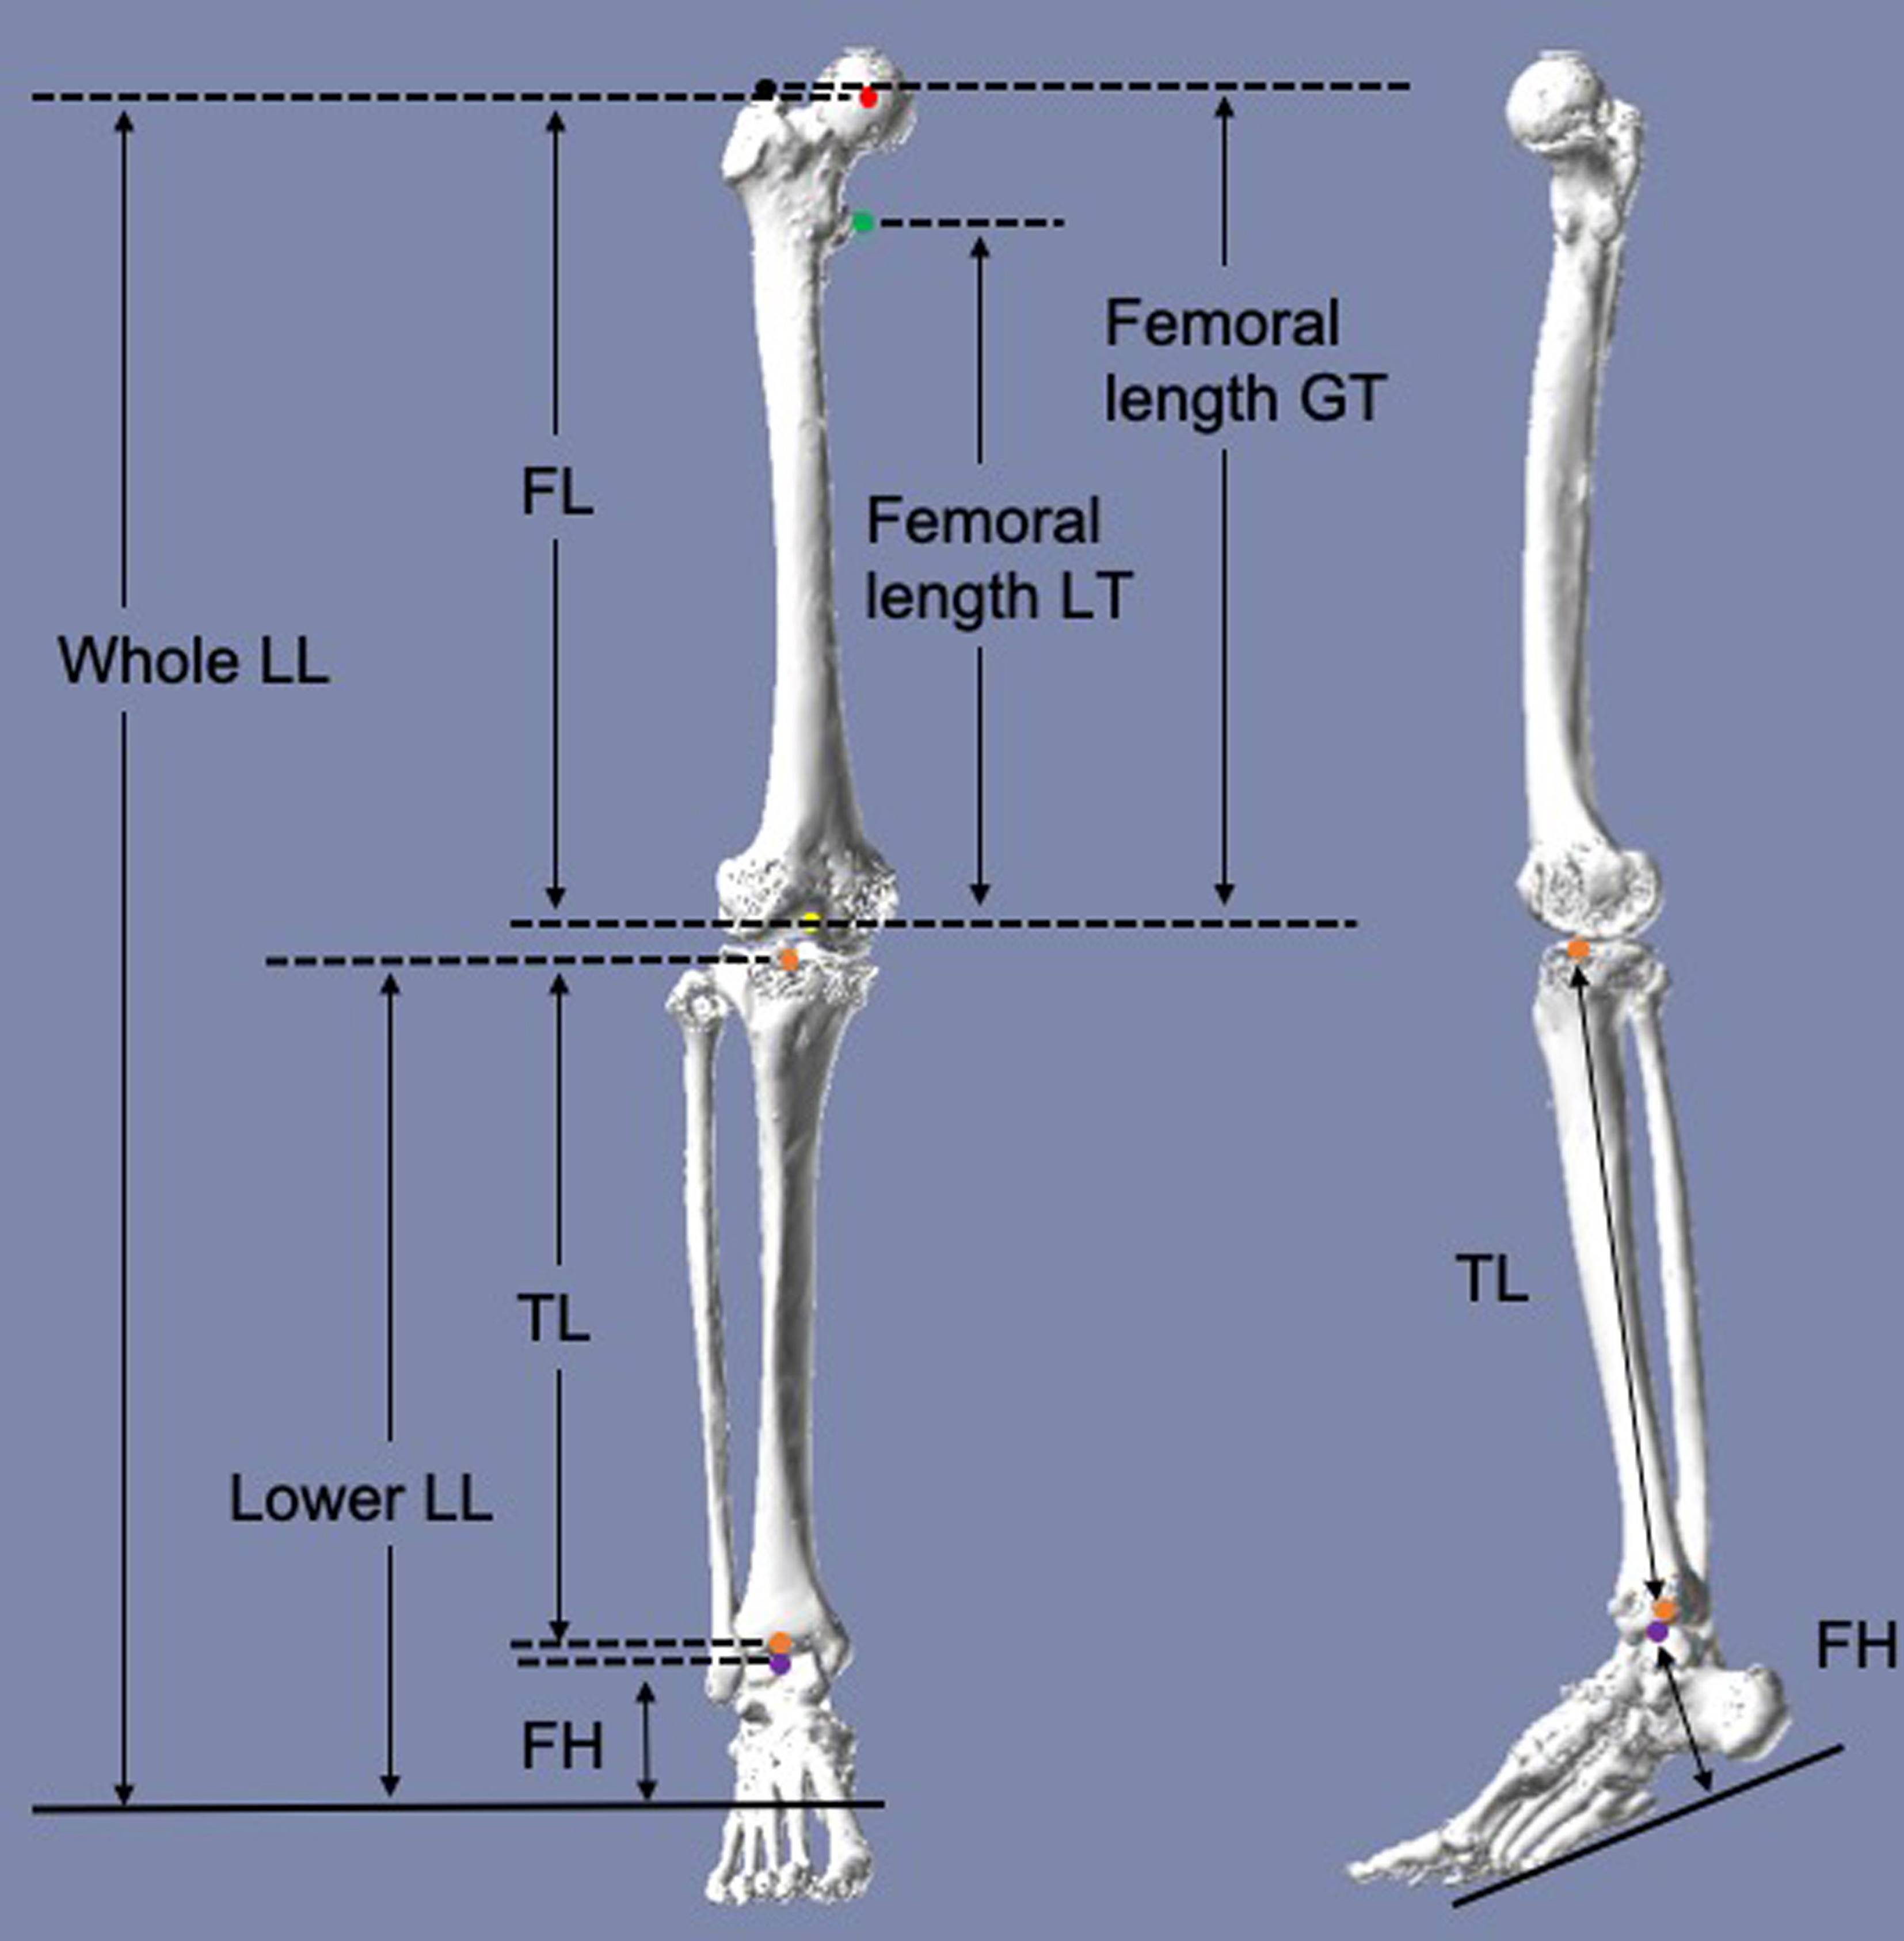 Fig. 1 
            Measurements in this study. Anatomical femoral length (FL) was defined as the distance between the centre of the femoral head (red point) and the knee centre of the femur (yellow point). Femoral length greater trochanter (GT) was defined as the vertical distance from the top of the GT (black point) to the mostdistal end of the intercondylar notch (yellow point). Femoral length lesser trochanter (LT) was defined as the vertical distance from the most medial prominence of the LT (green point) to the most distal end of the intercondylar notch (yellow point). Lower leg length (LL) was defined as the sum of tibial length (TL) andfoot height (FH). Whole LL was defined as the sum of FL and lower LL.
          